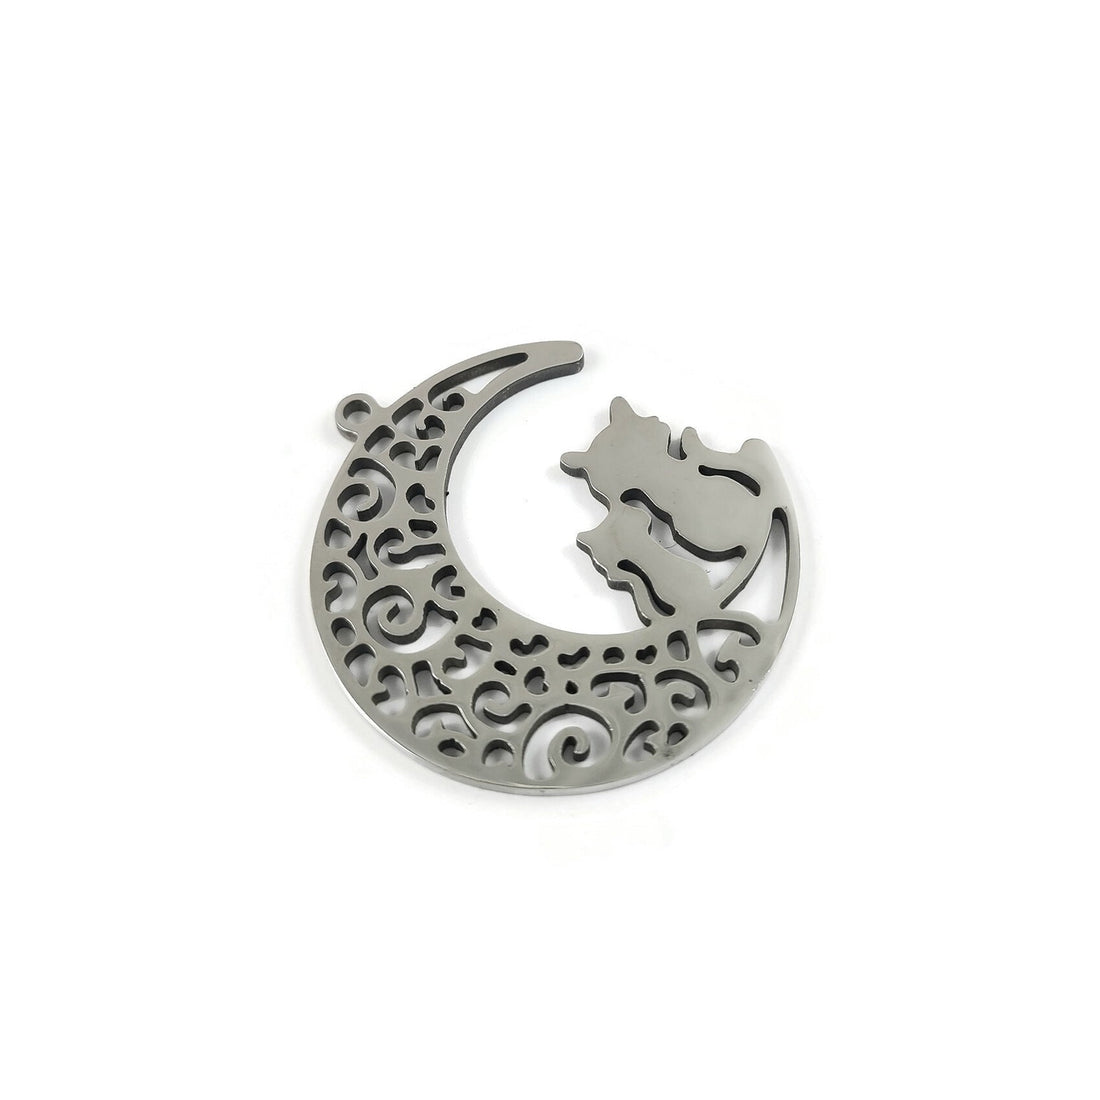 Cat and moon pendant, Stainless steel hypoallergenic, DIY celestial necklace pendant